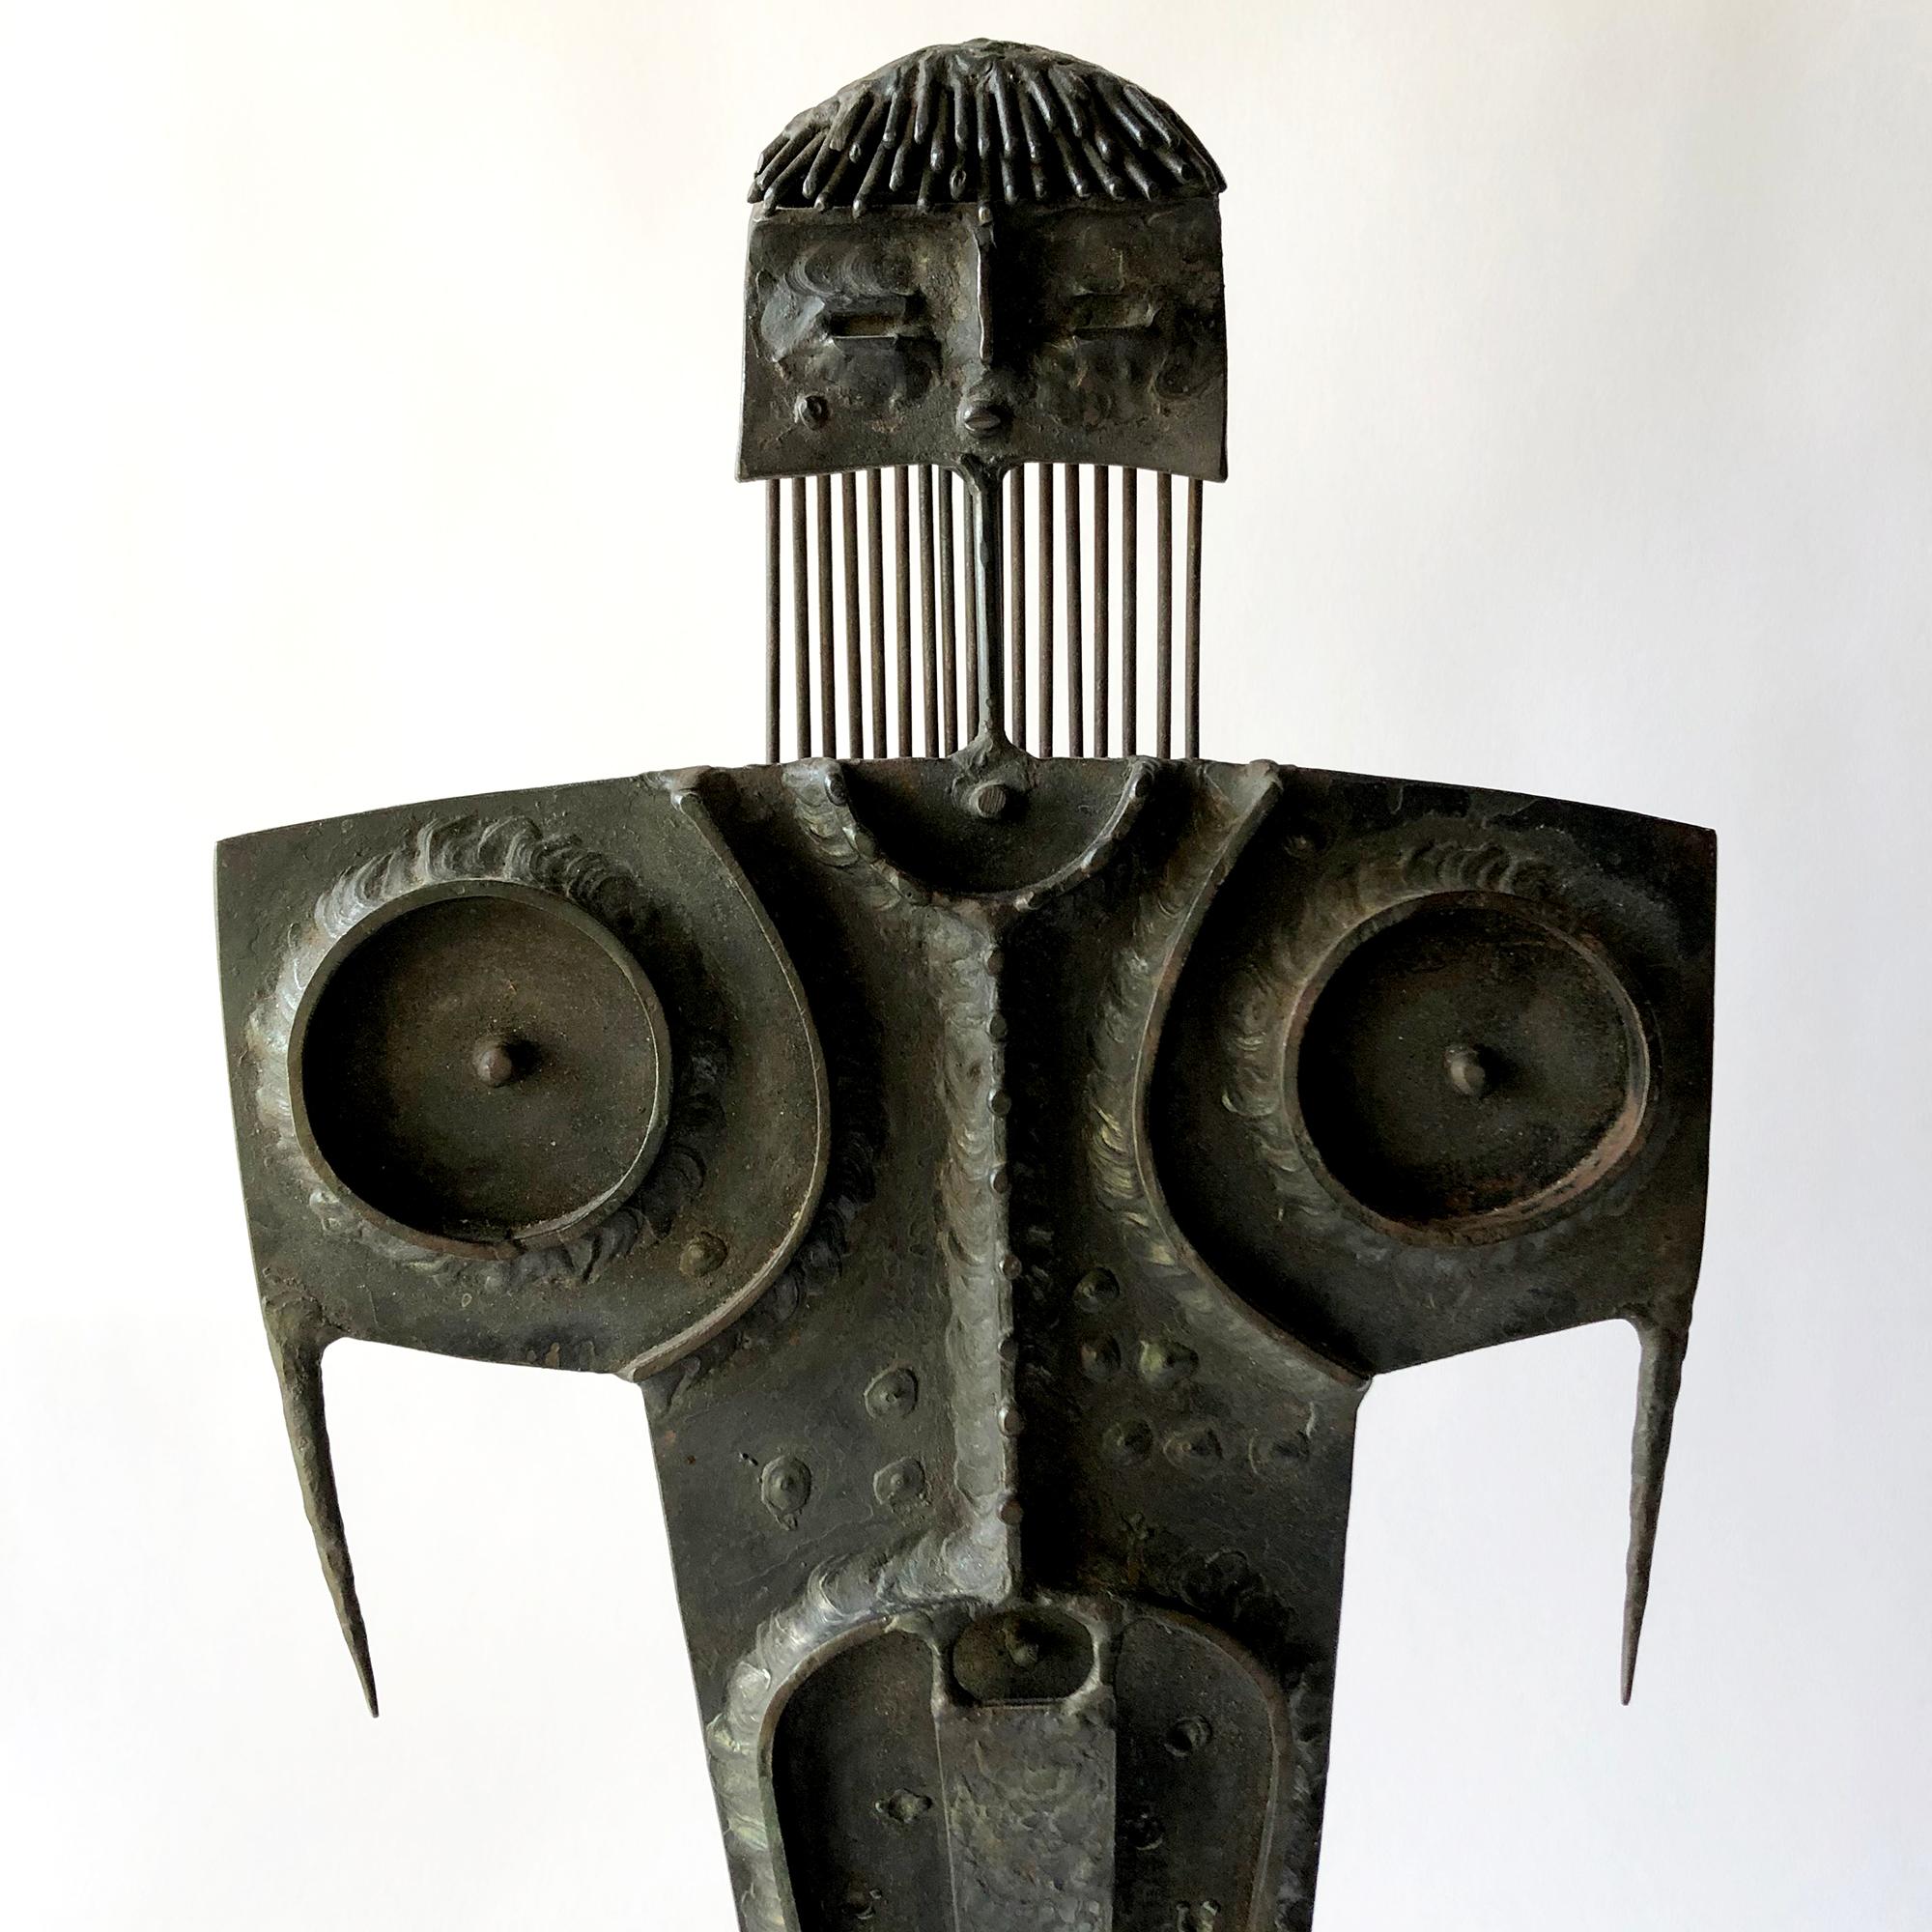 1960s modernist iron sculpture on wood base created by Jack Boyd of San Diego, California. Sculpture measures 18